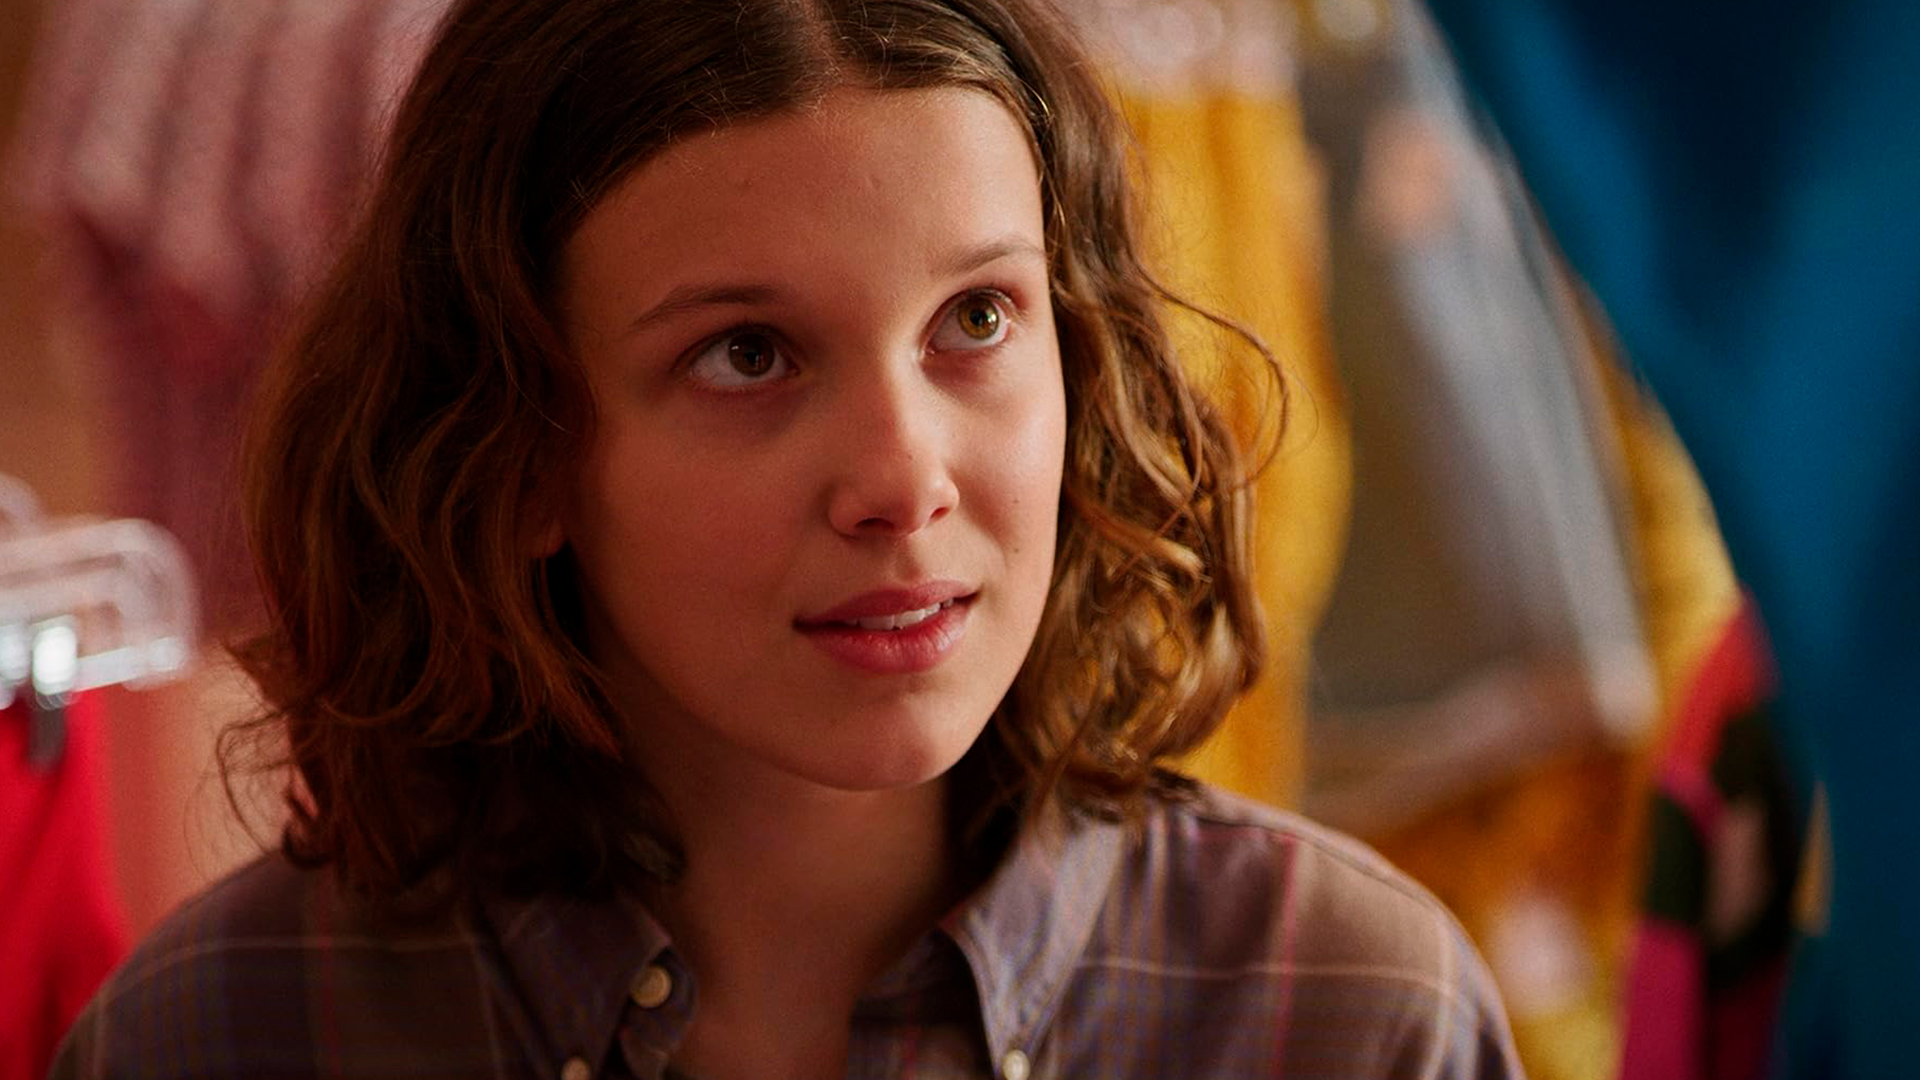 Millie Bobby Brown Smiling Wallpapers - Wallpaper Cave